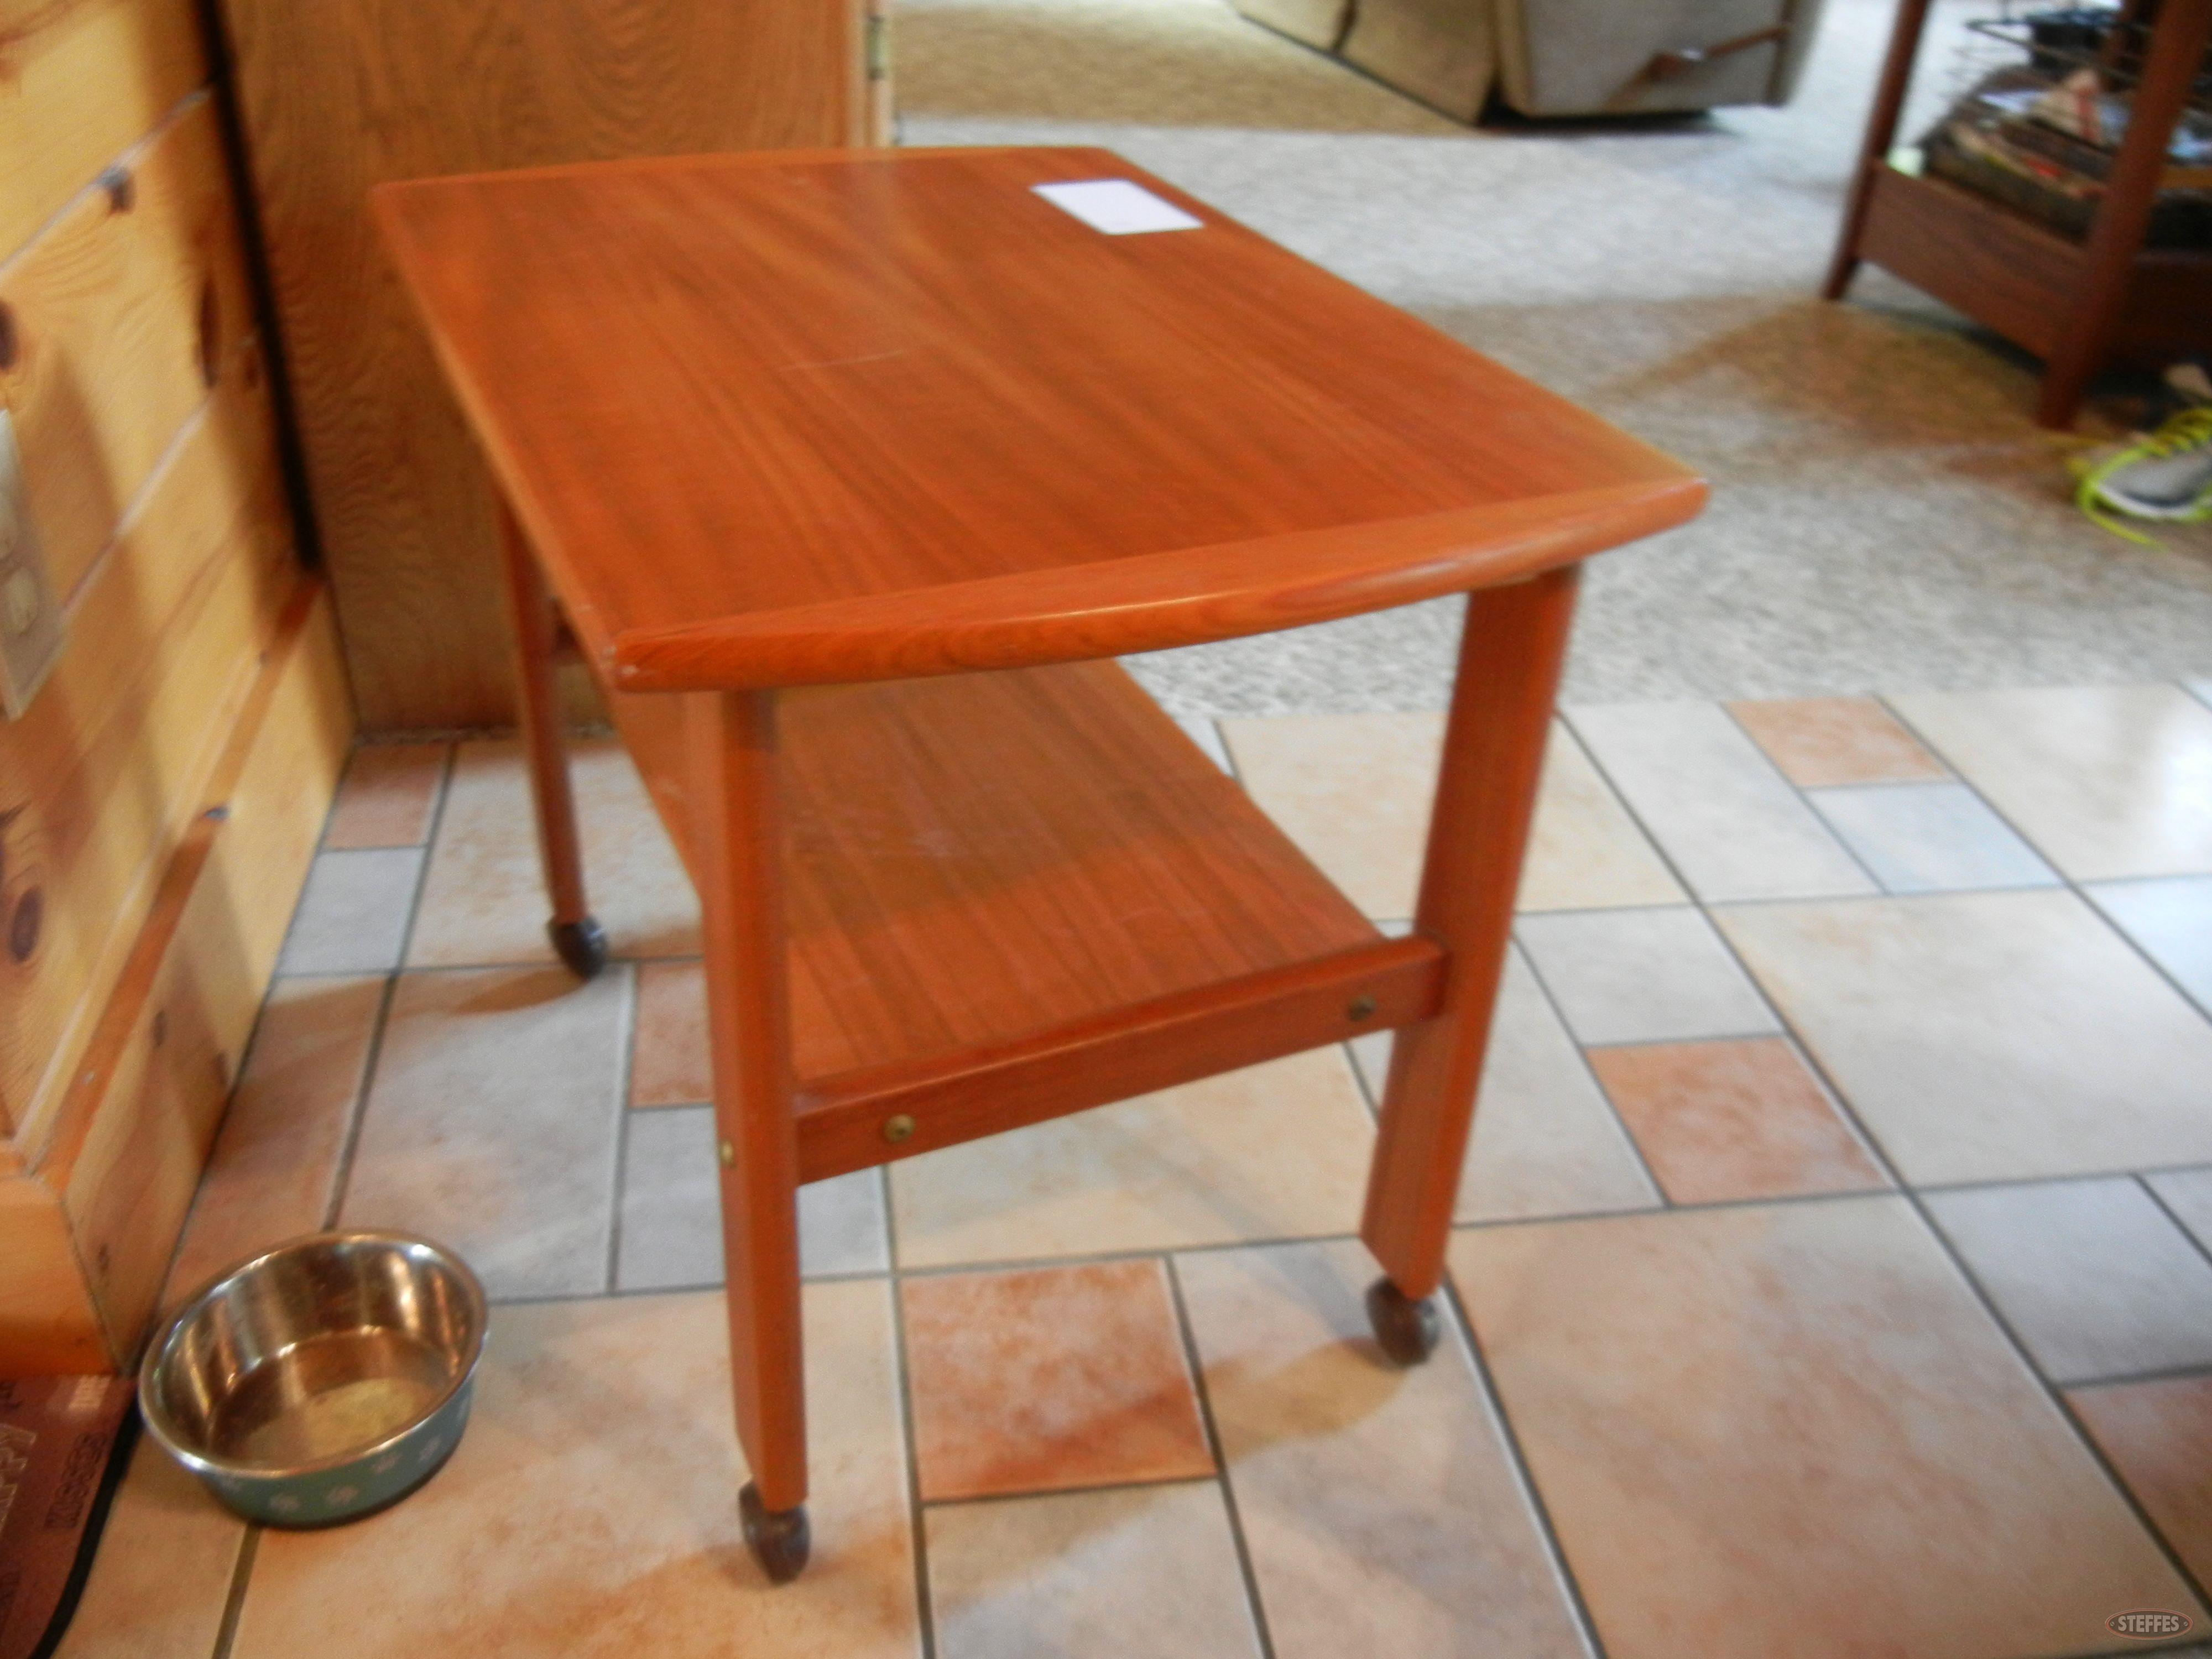 Small table on casters